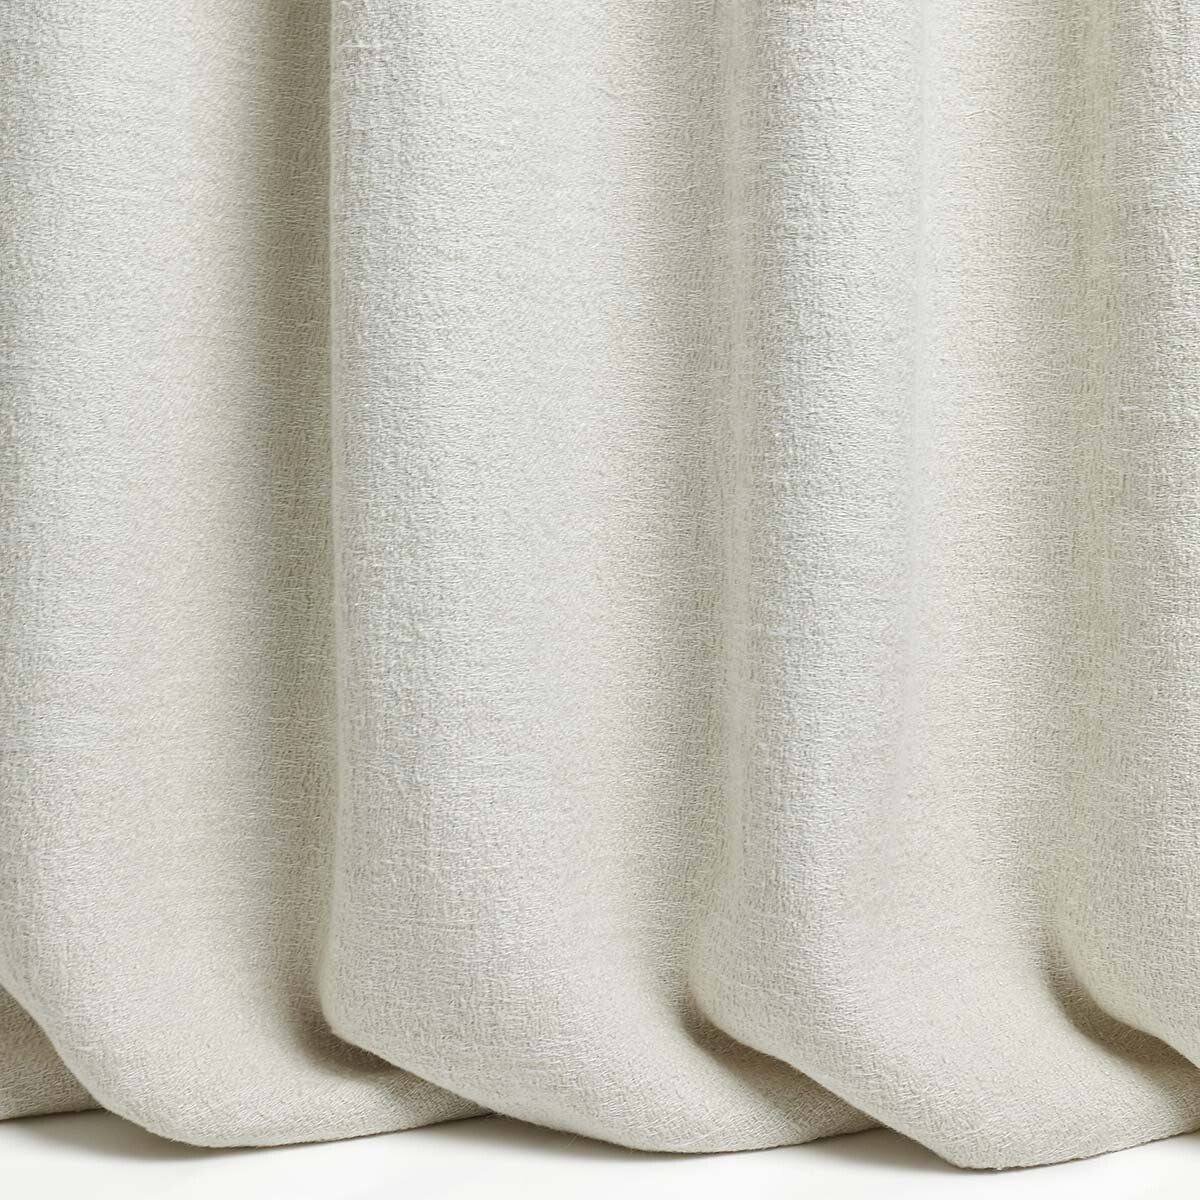 Vivace fabric in 6 color - pattern LZ-30409.06.0 - by Kravet Couture in the Lizzo collection